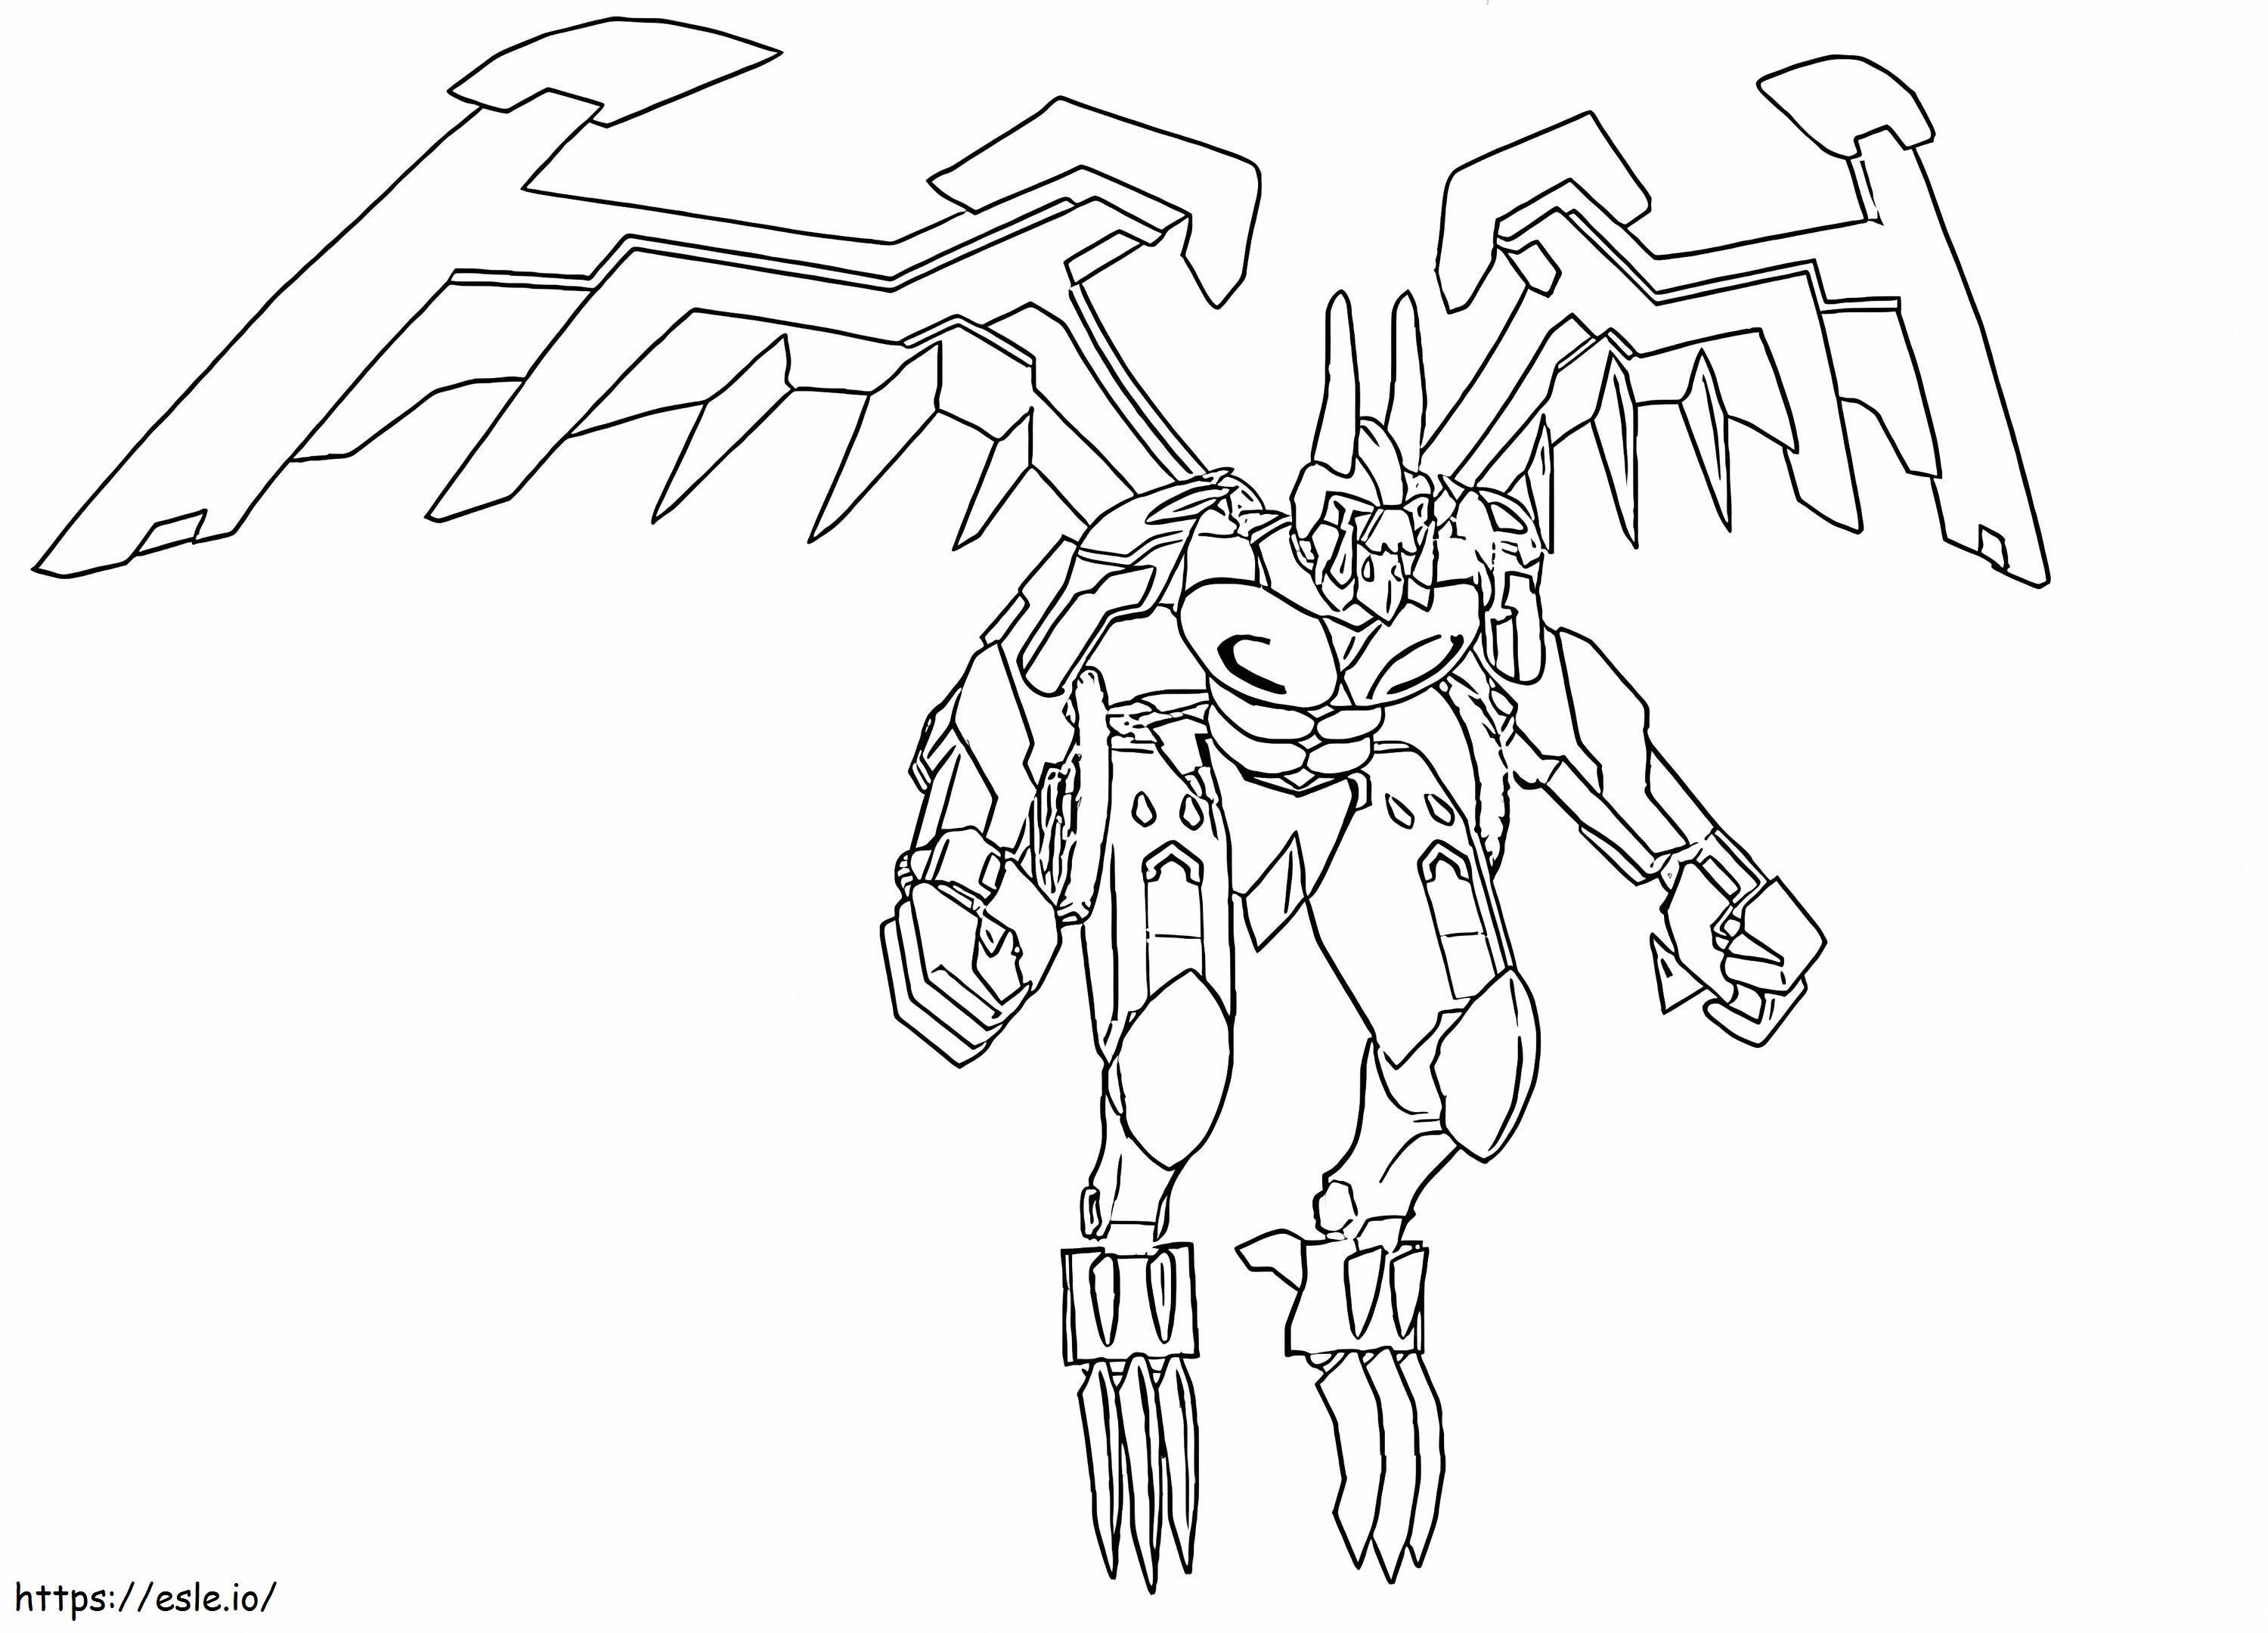 Flying Screechers Wild coloring page